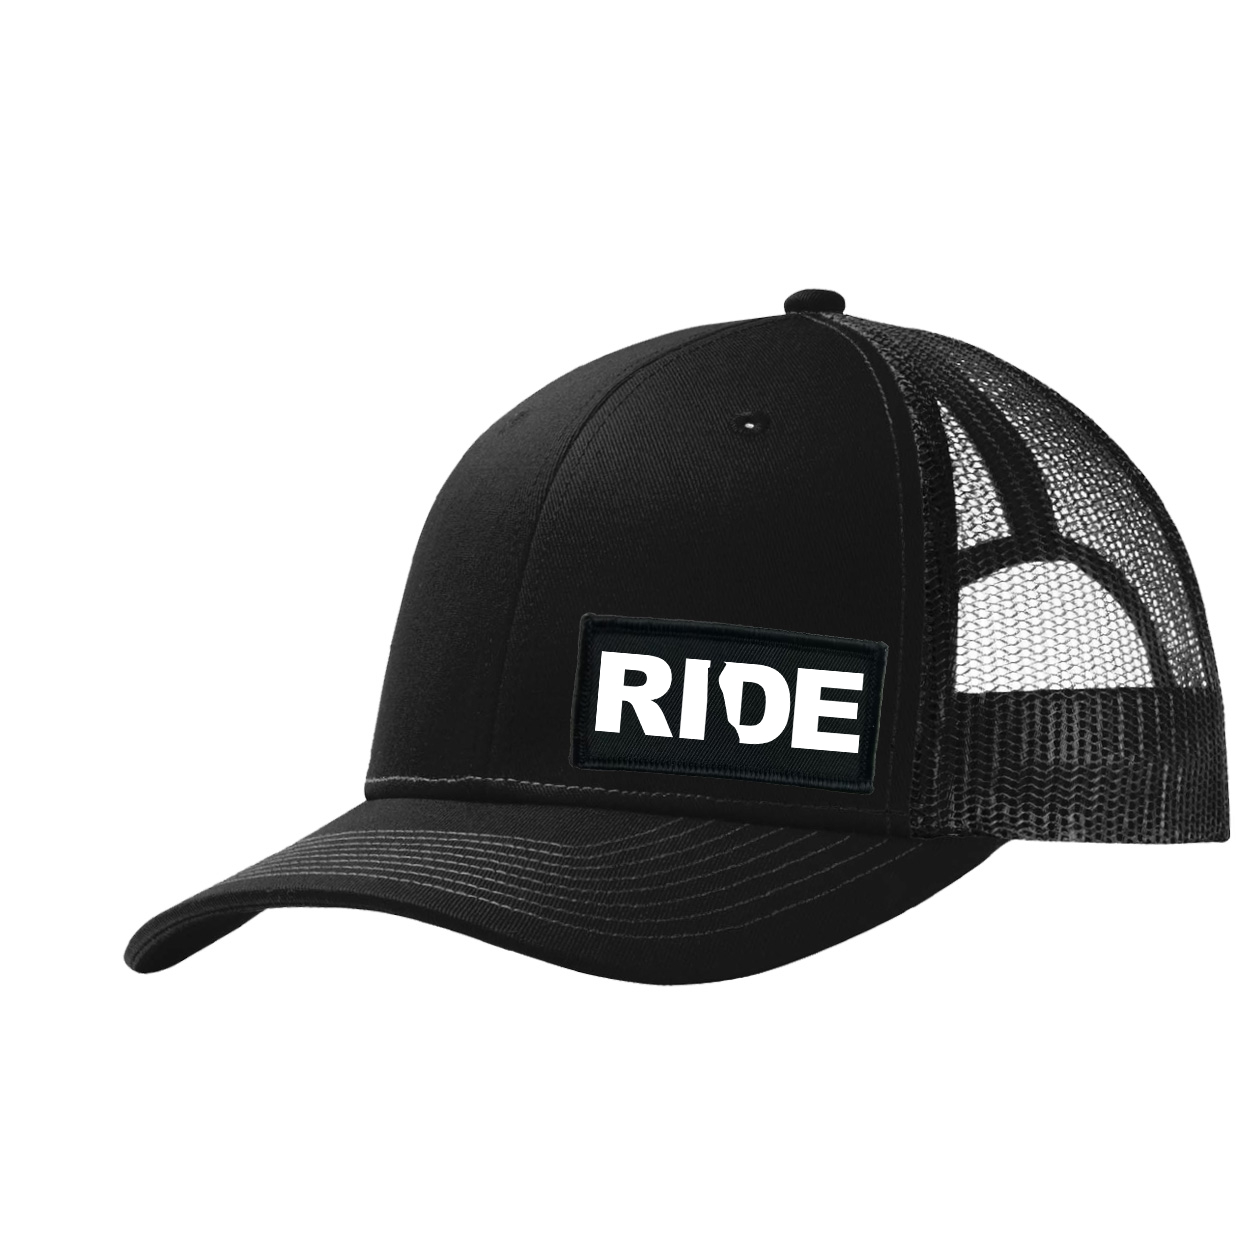 Ride Delaware Night Out Woven Patch Snapback Trucker Hat Black (White Logo)